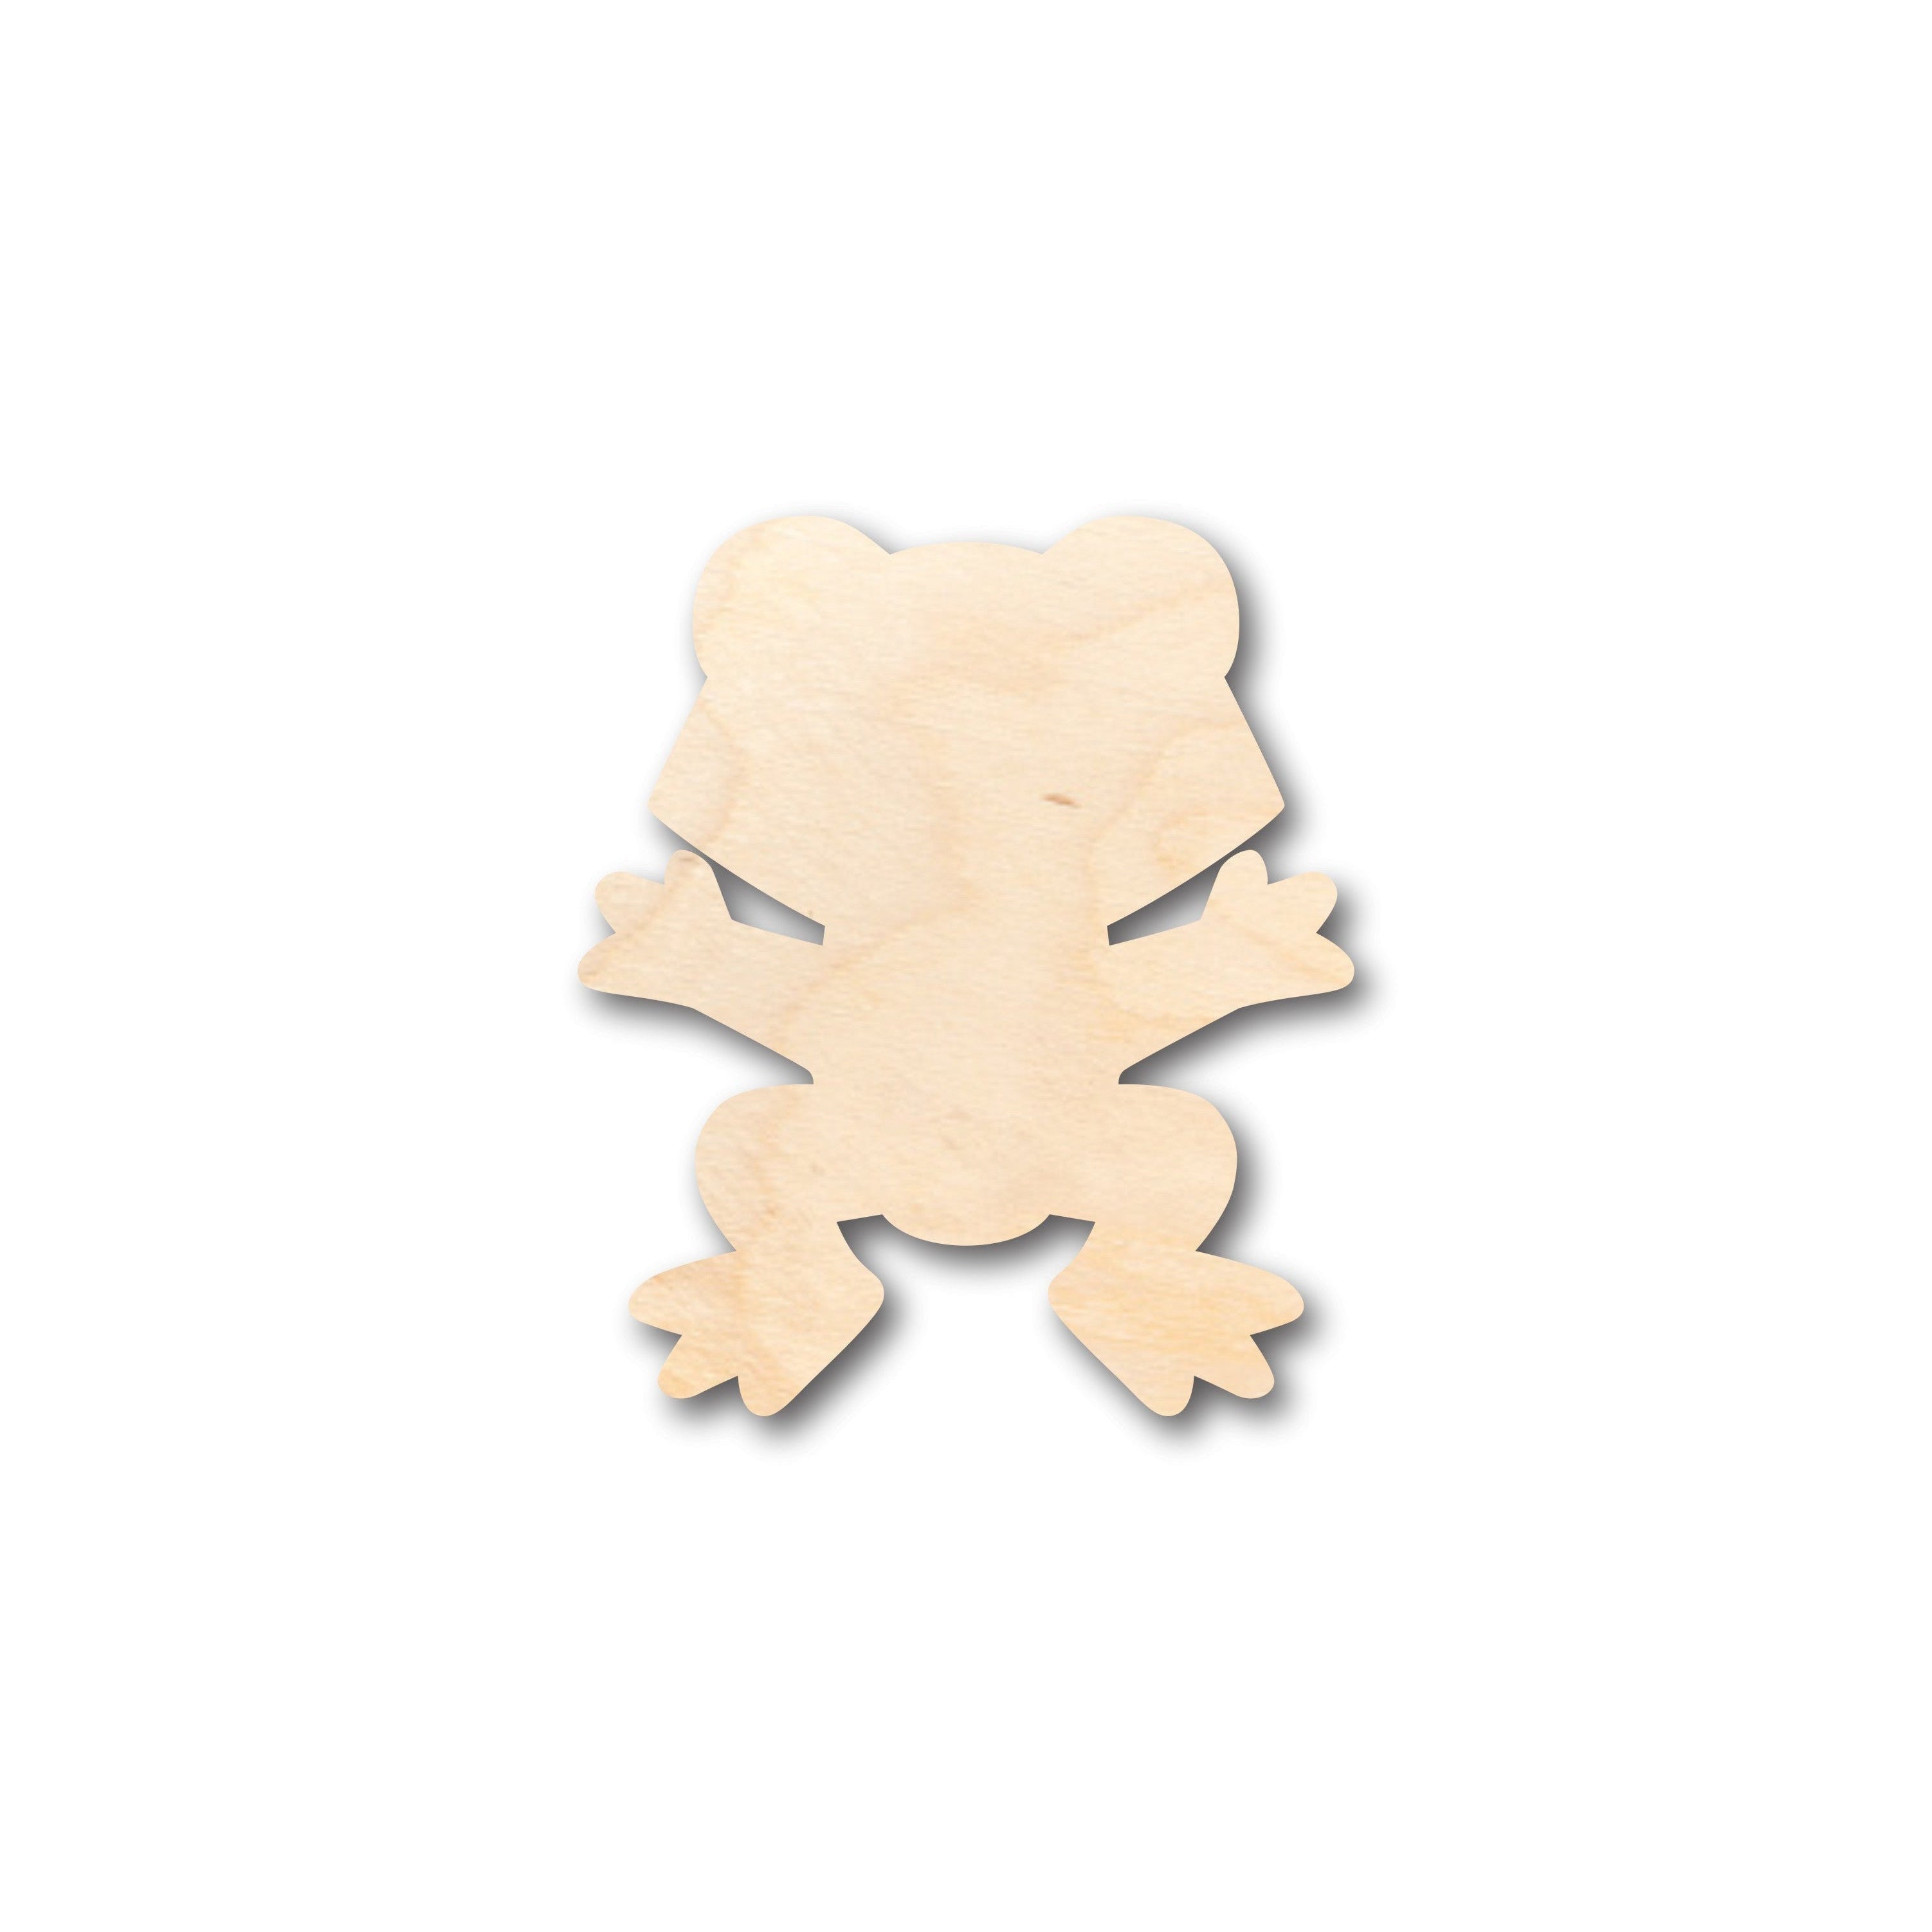 Unfinished Wood Cute Frog Shape - Craft - up to 36